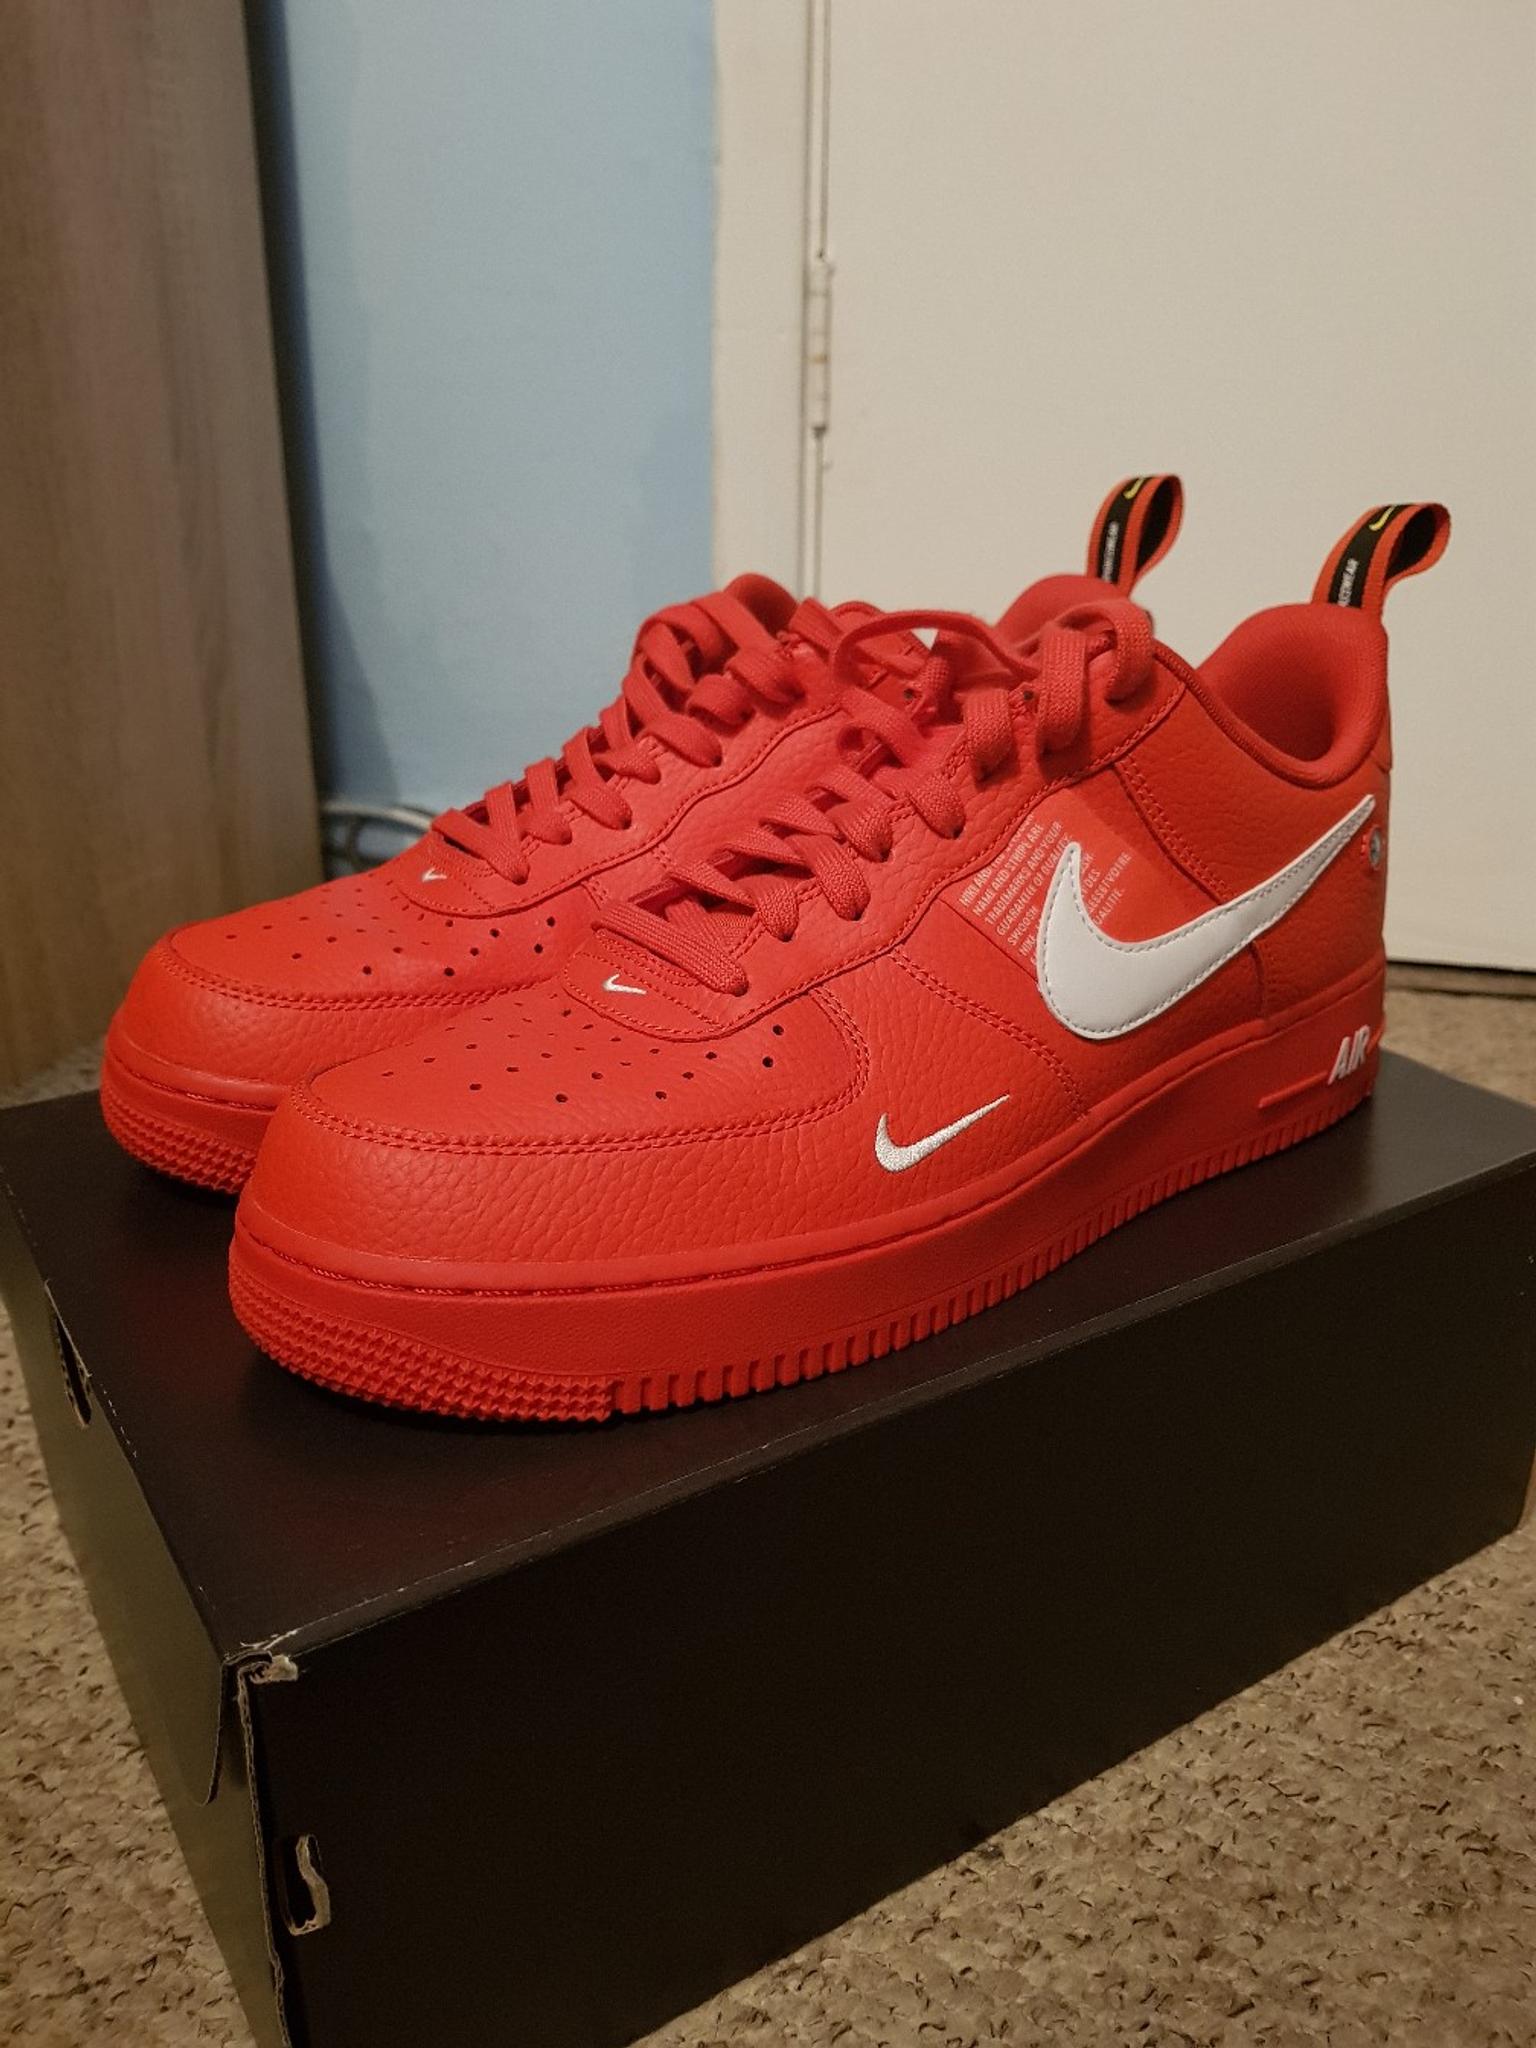 red utility forces